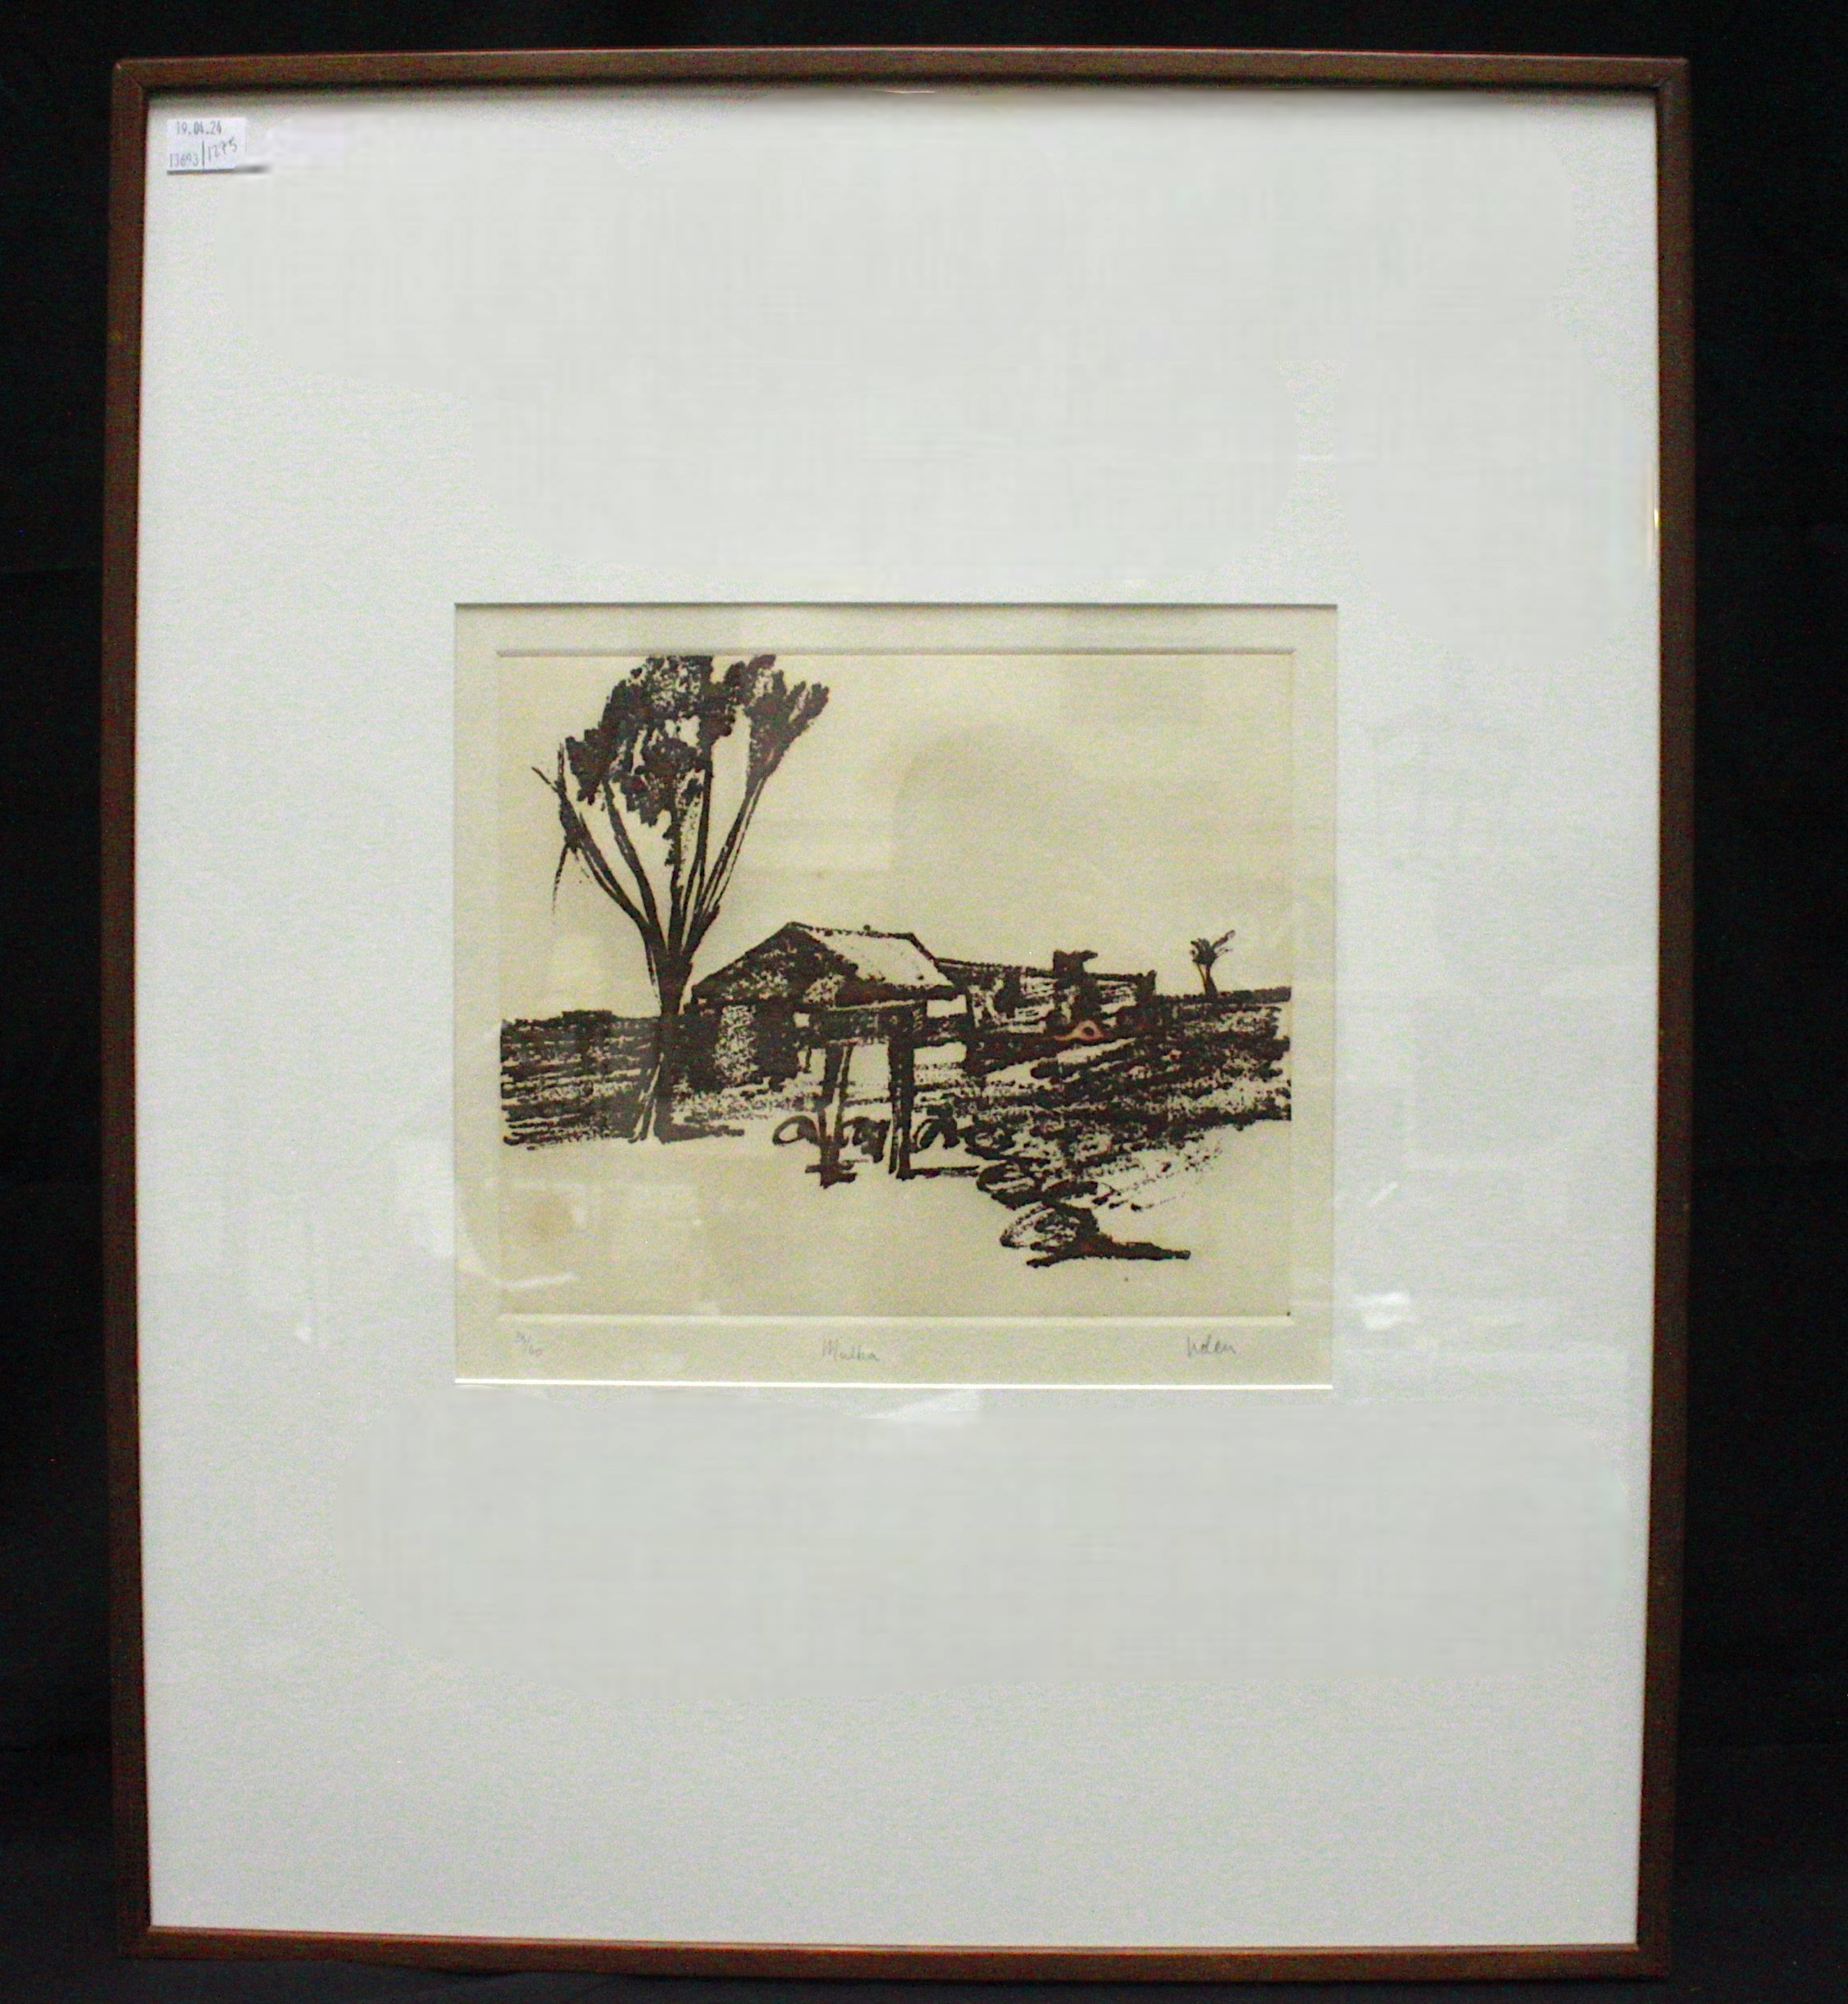 Sidney Nolan (1917 - 1992) ‘Deserted Homestead’ from the Dust Suite (1971) etching in red ink,